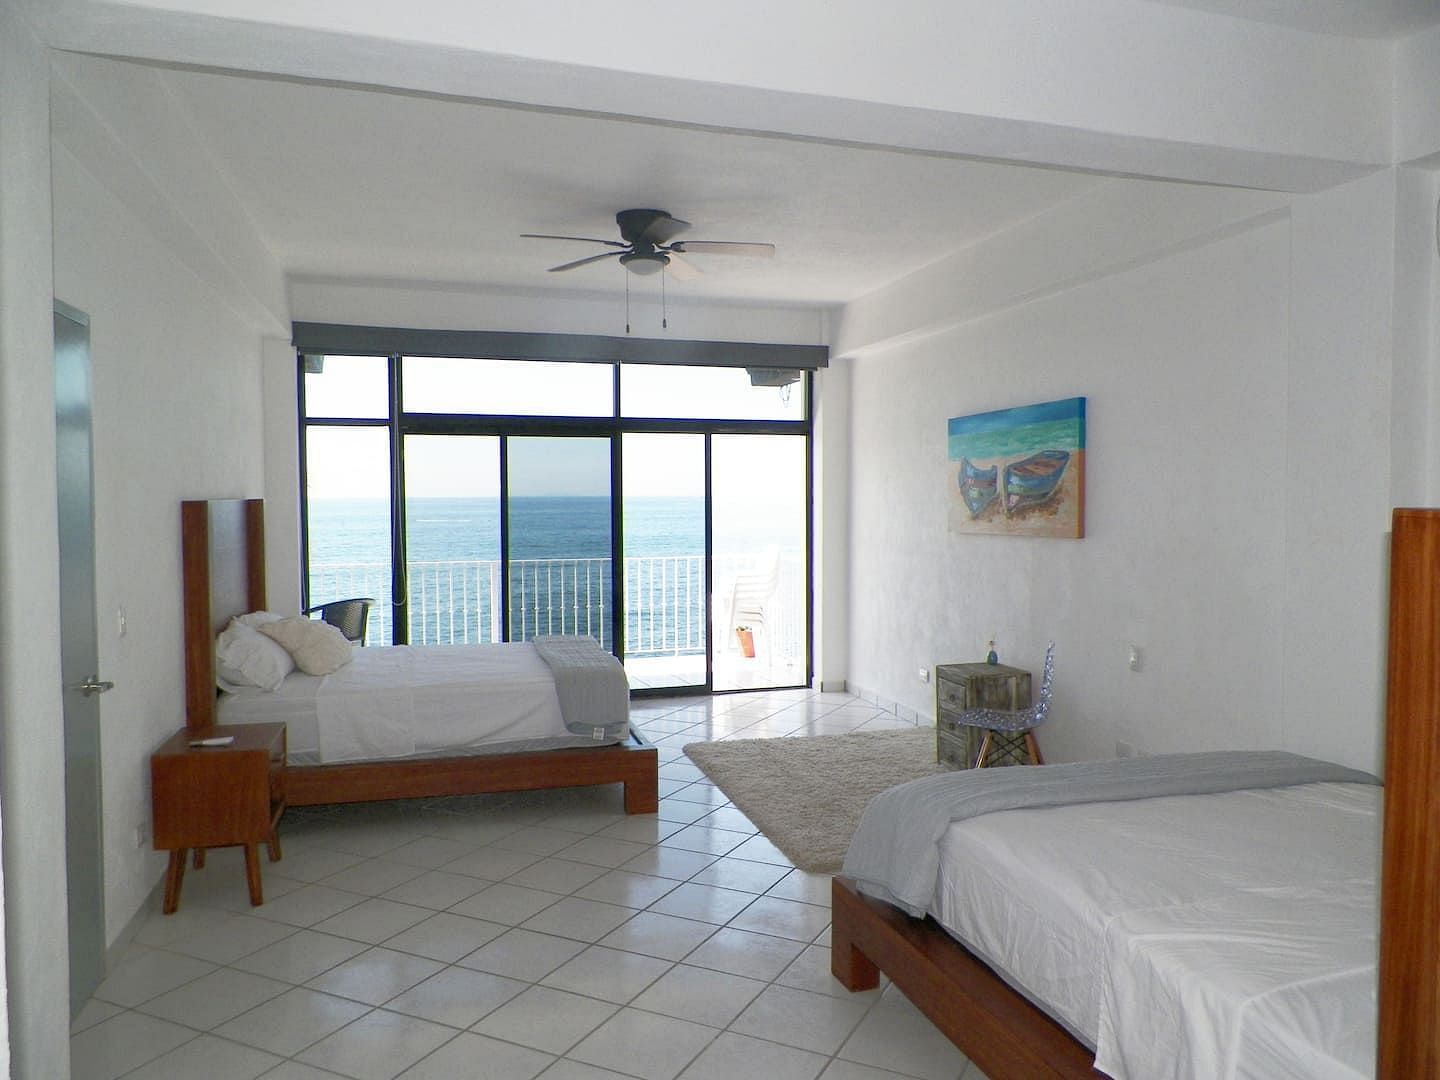 JWguest Apartment at Aguacate, Jalisco | Amazing and peaceful Ocean View | Jwbnb no brobnb 36